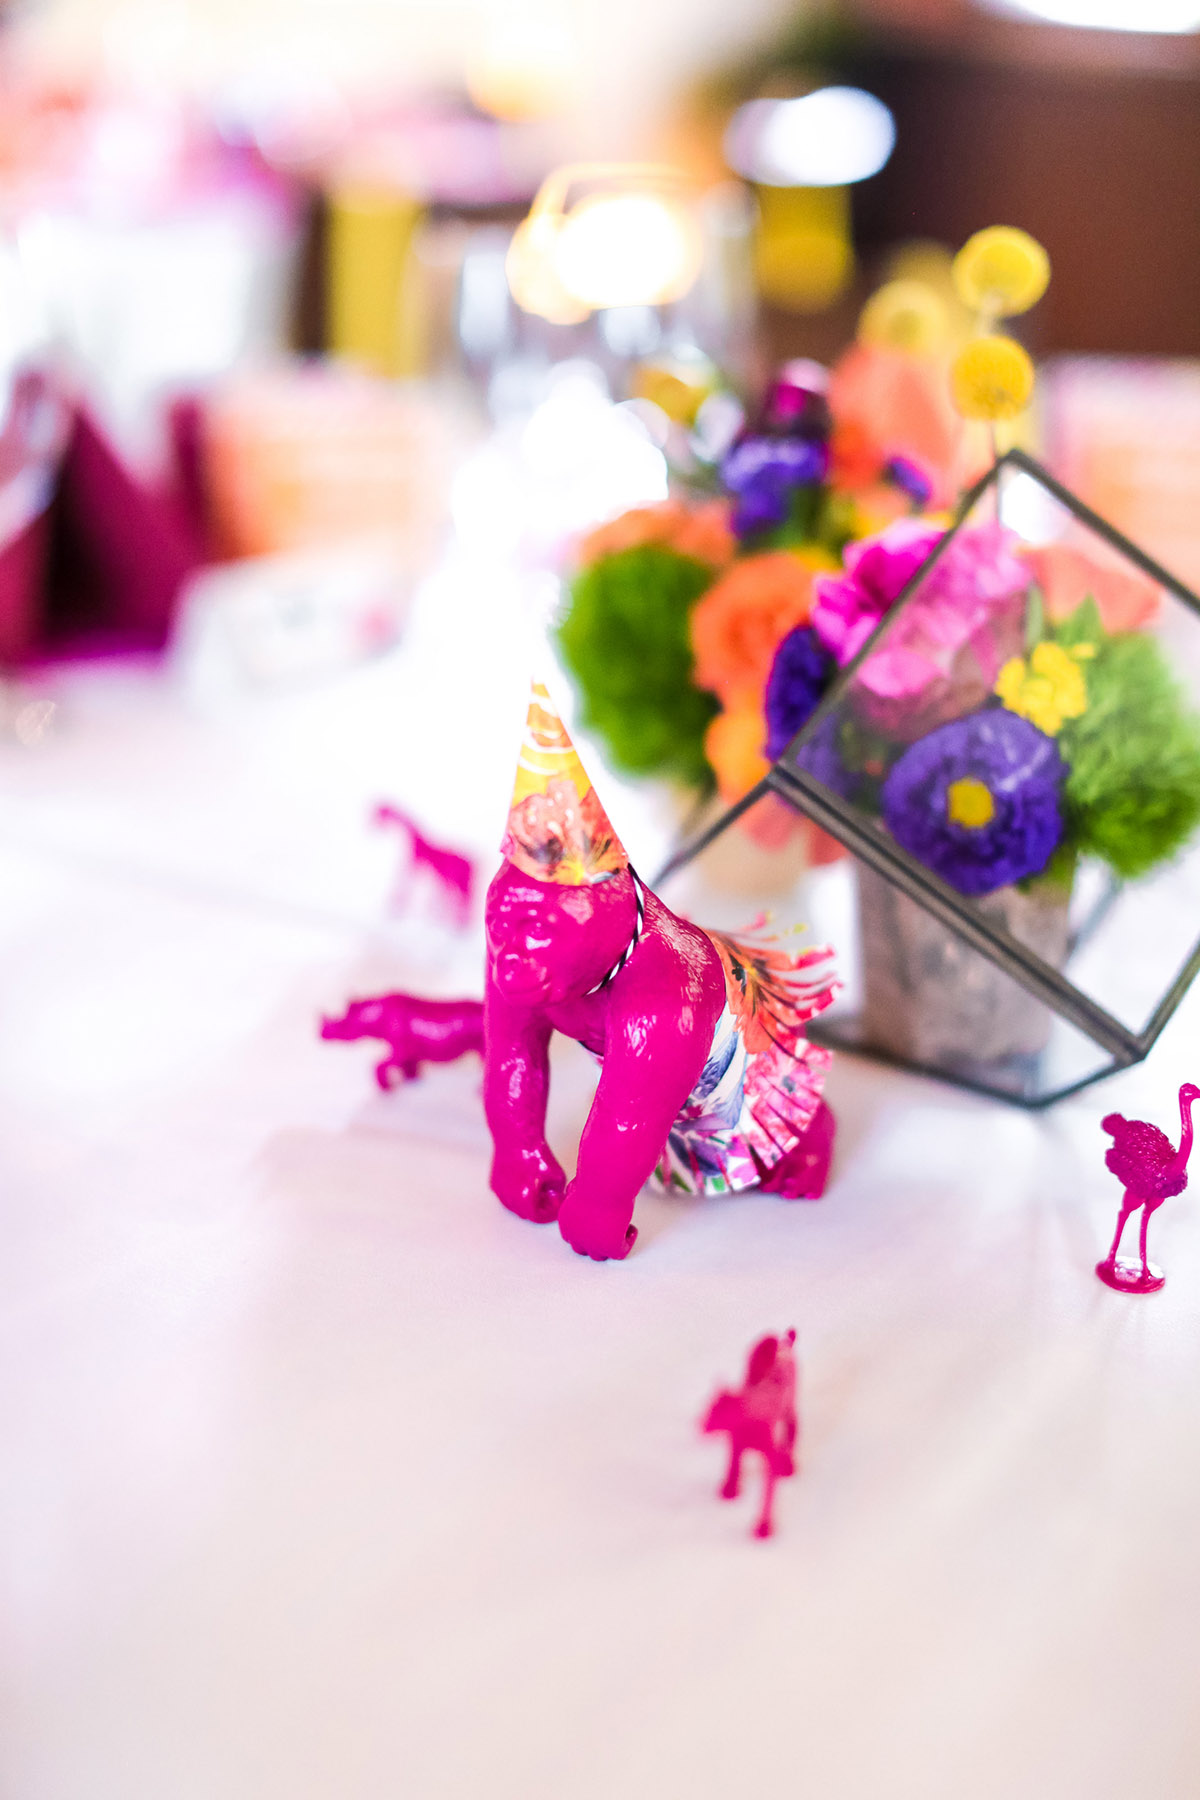 Party Animal Escort Table from A Well Crafted Party with photos by Mary Boyden